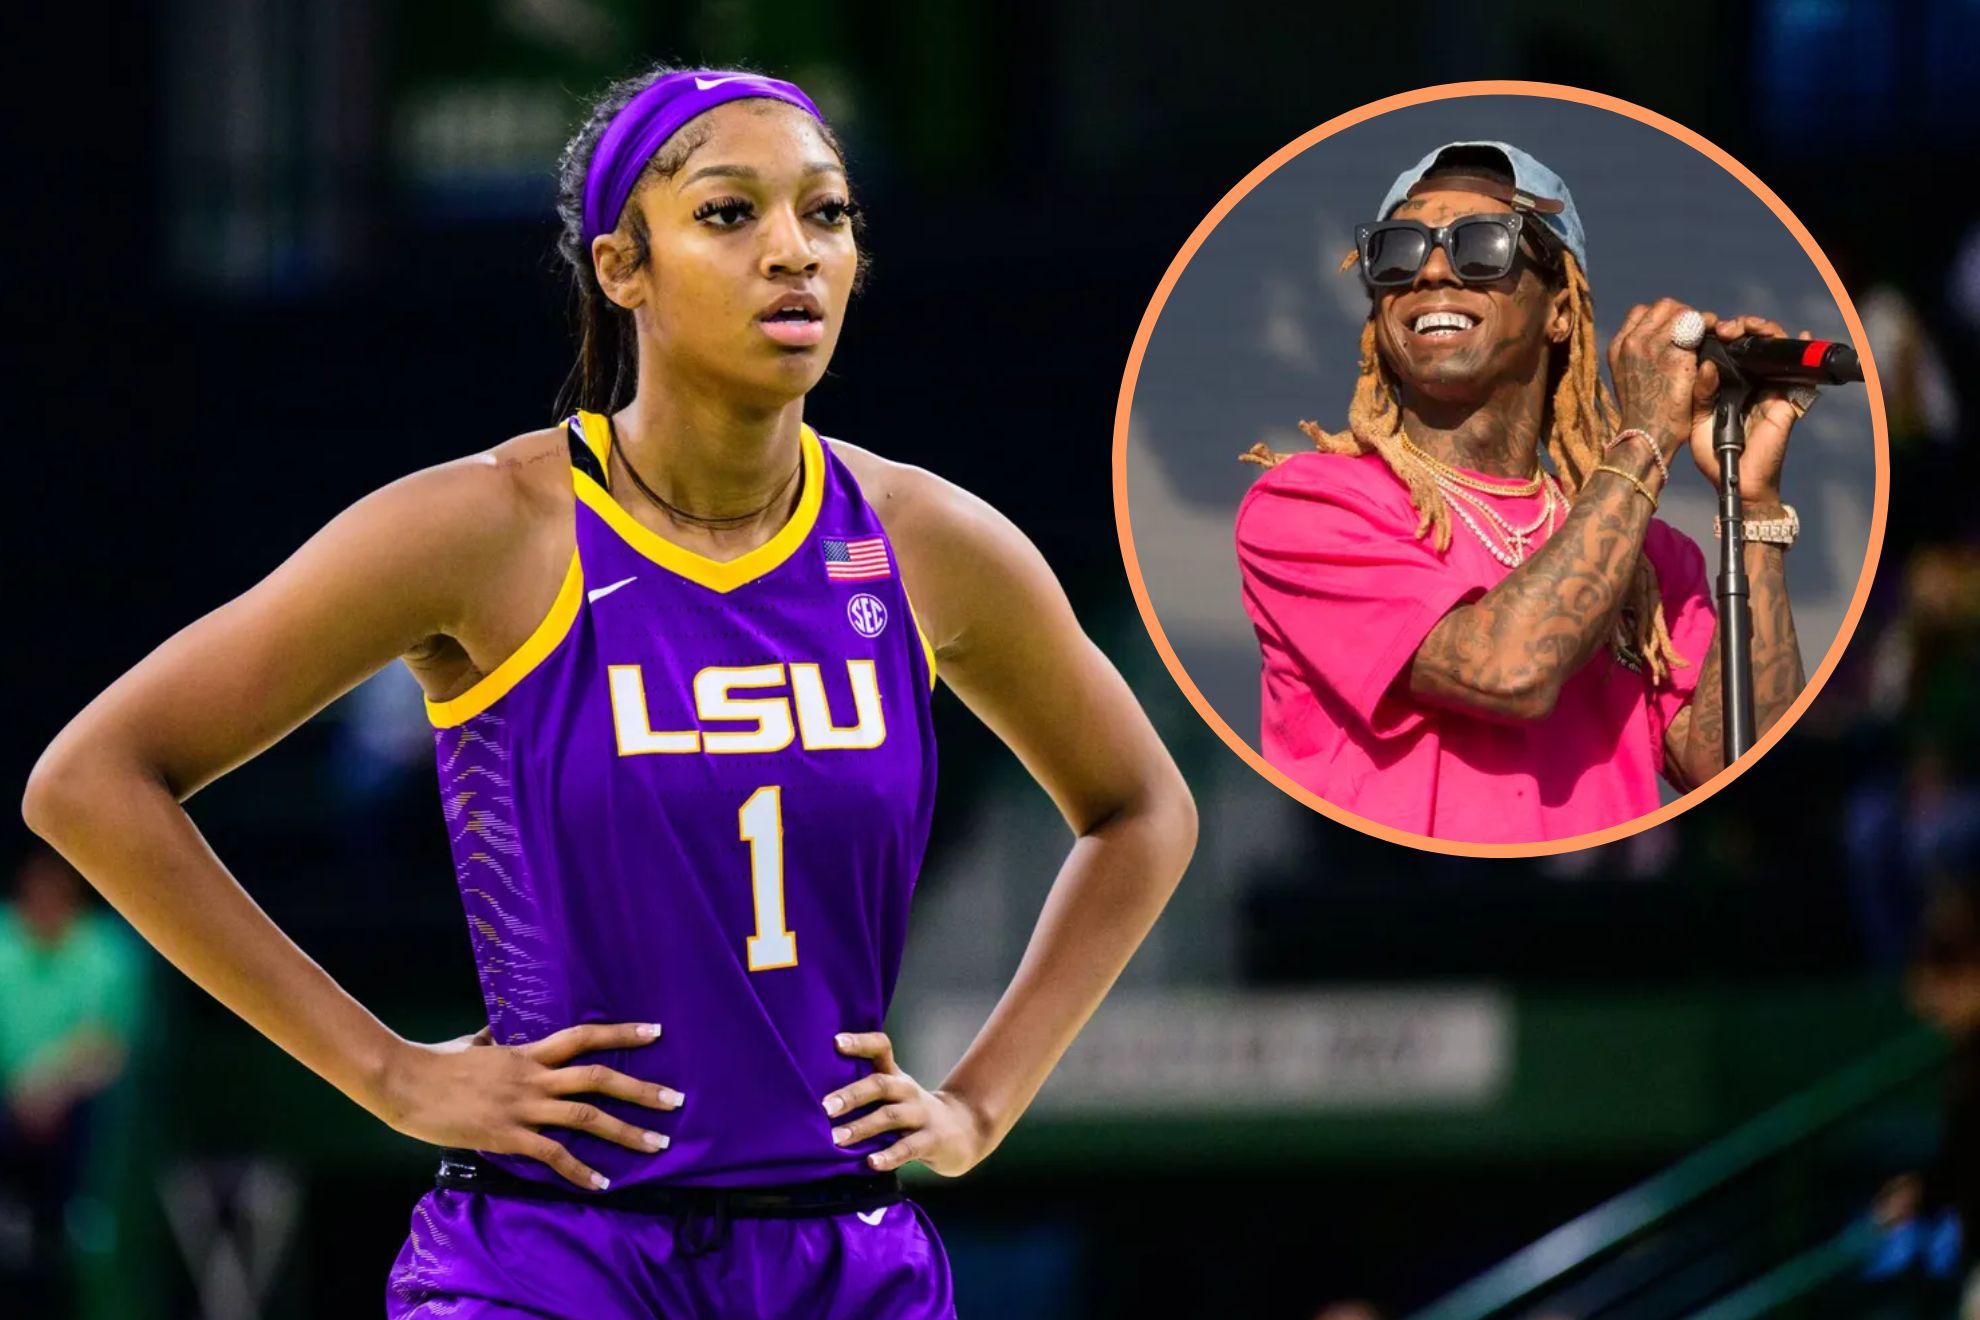 LSU star Angel Reese got some unexpected praise from rap icon Lil Wayne.